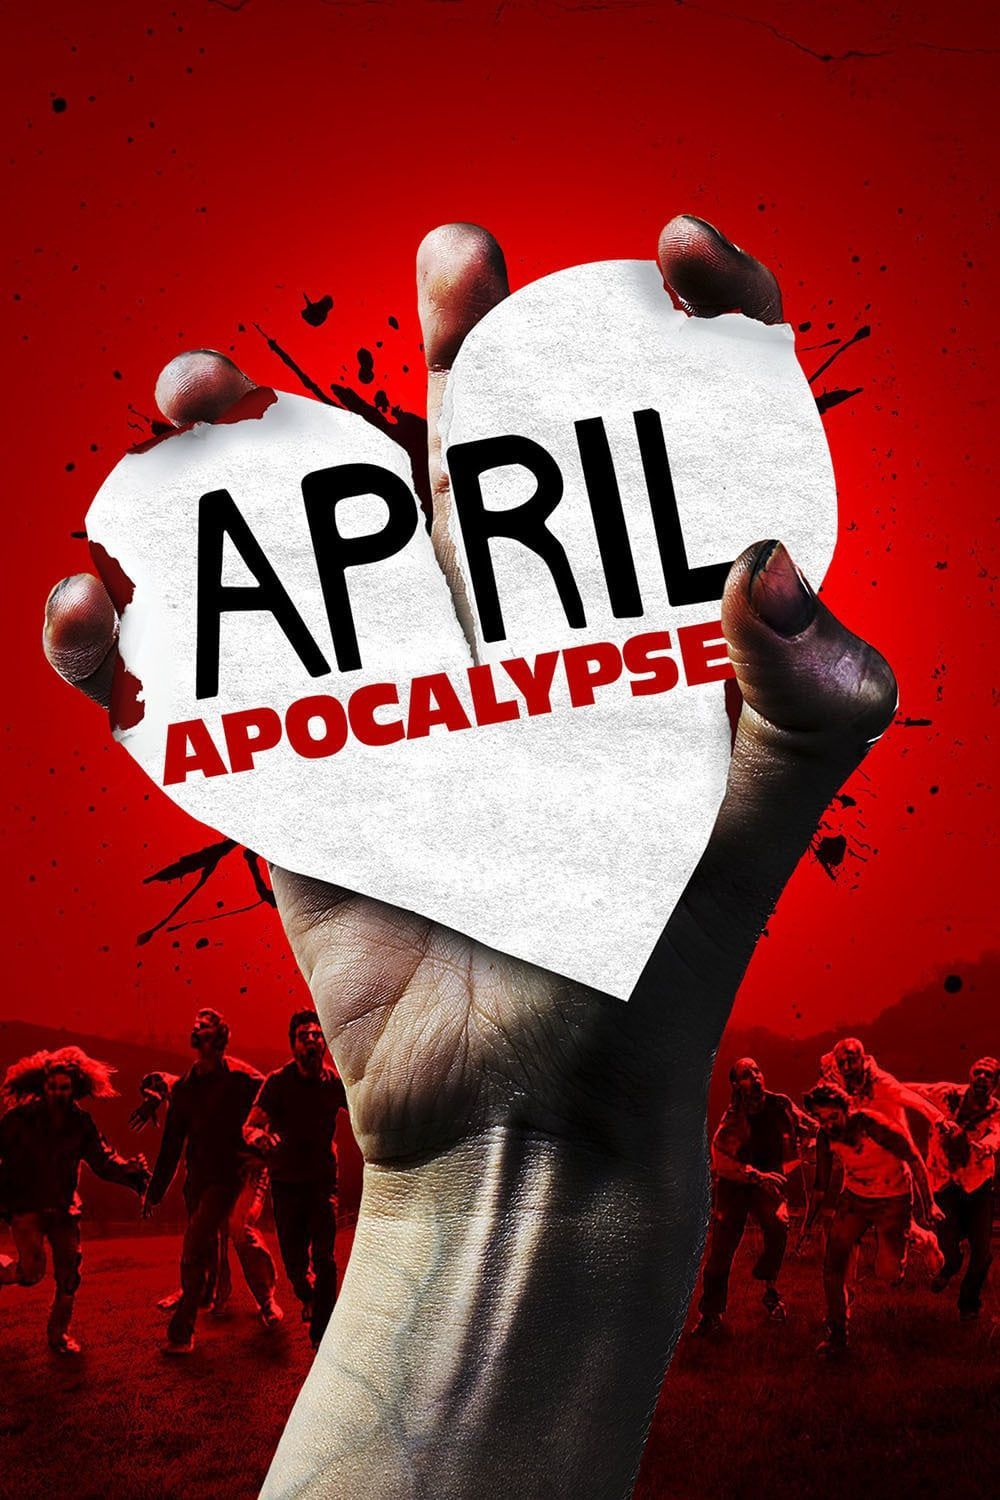 alexander tabora recommends apocalypse full movie online pic